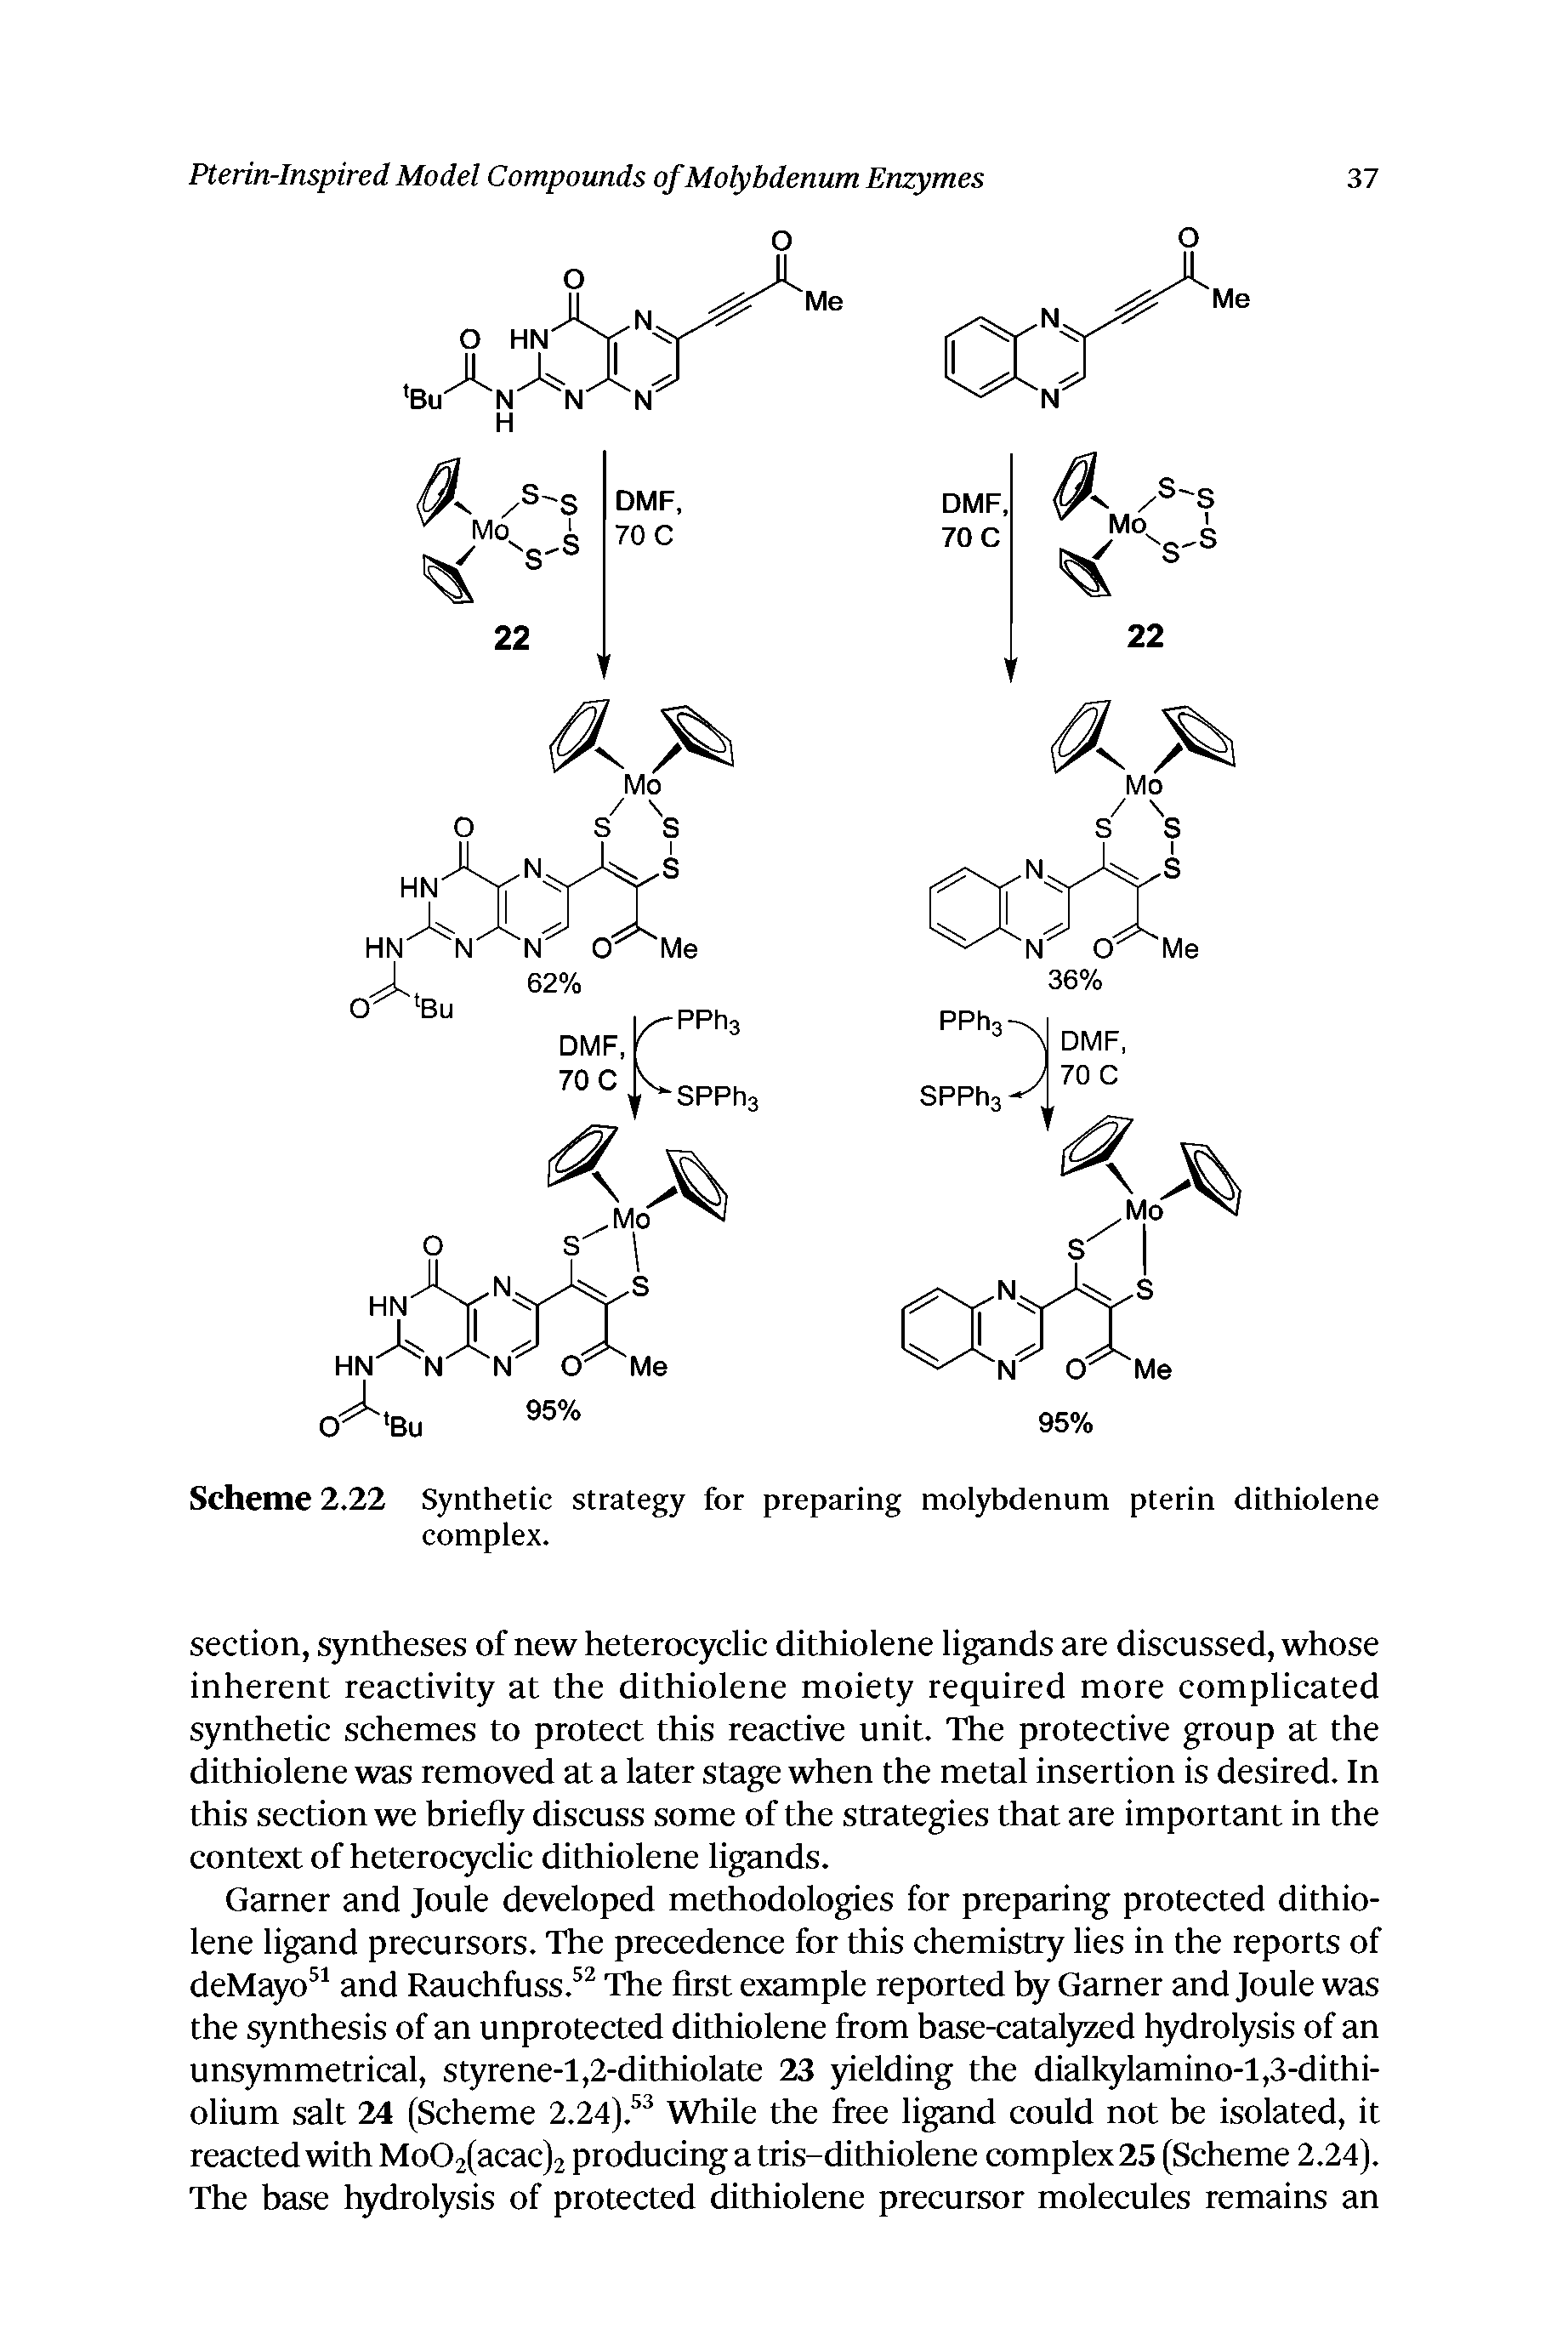 Scheme 2.22 Synthetic strategy for preparing molybdenum pterin dithiolene complex.